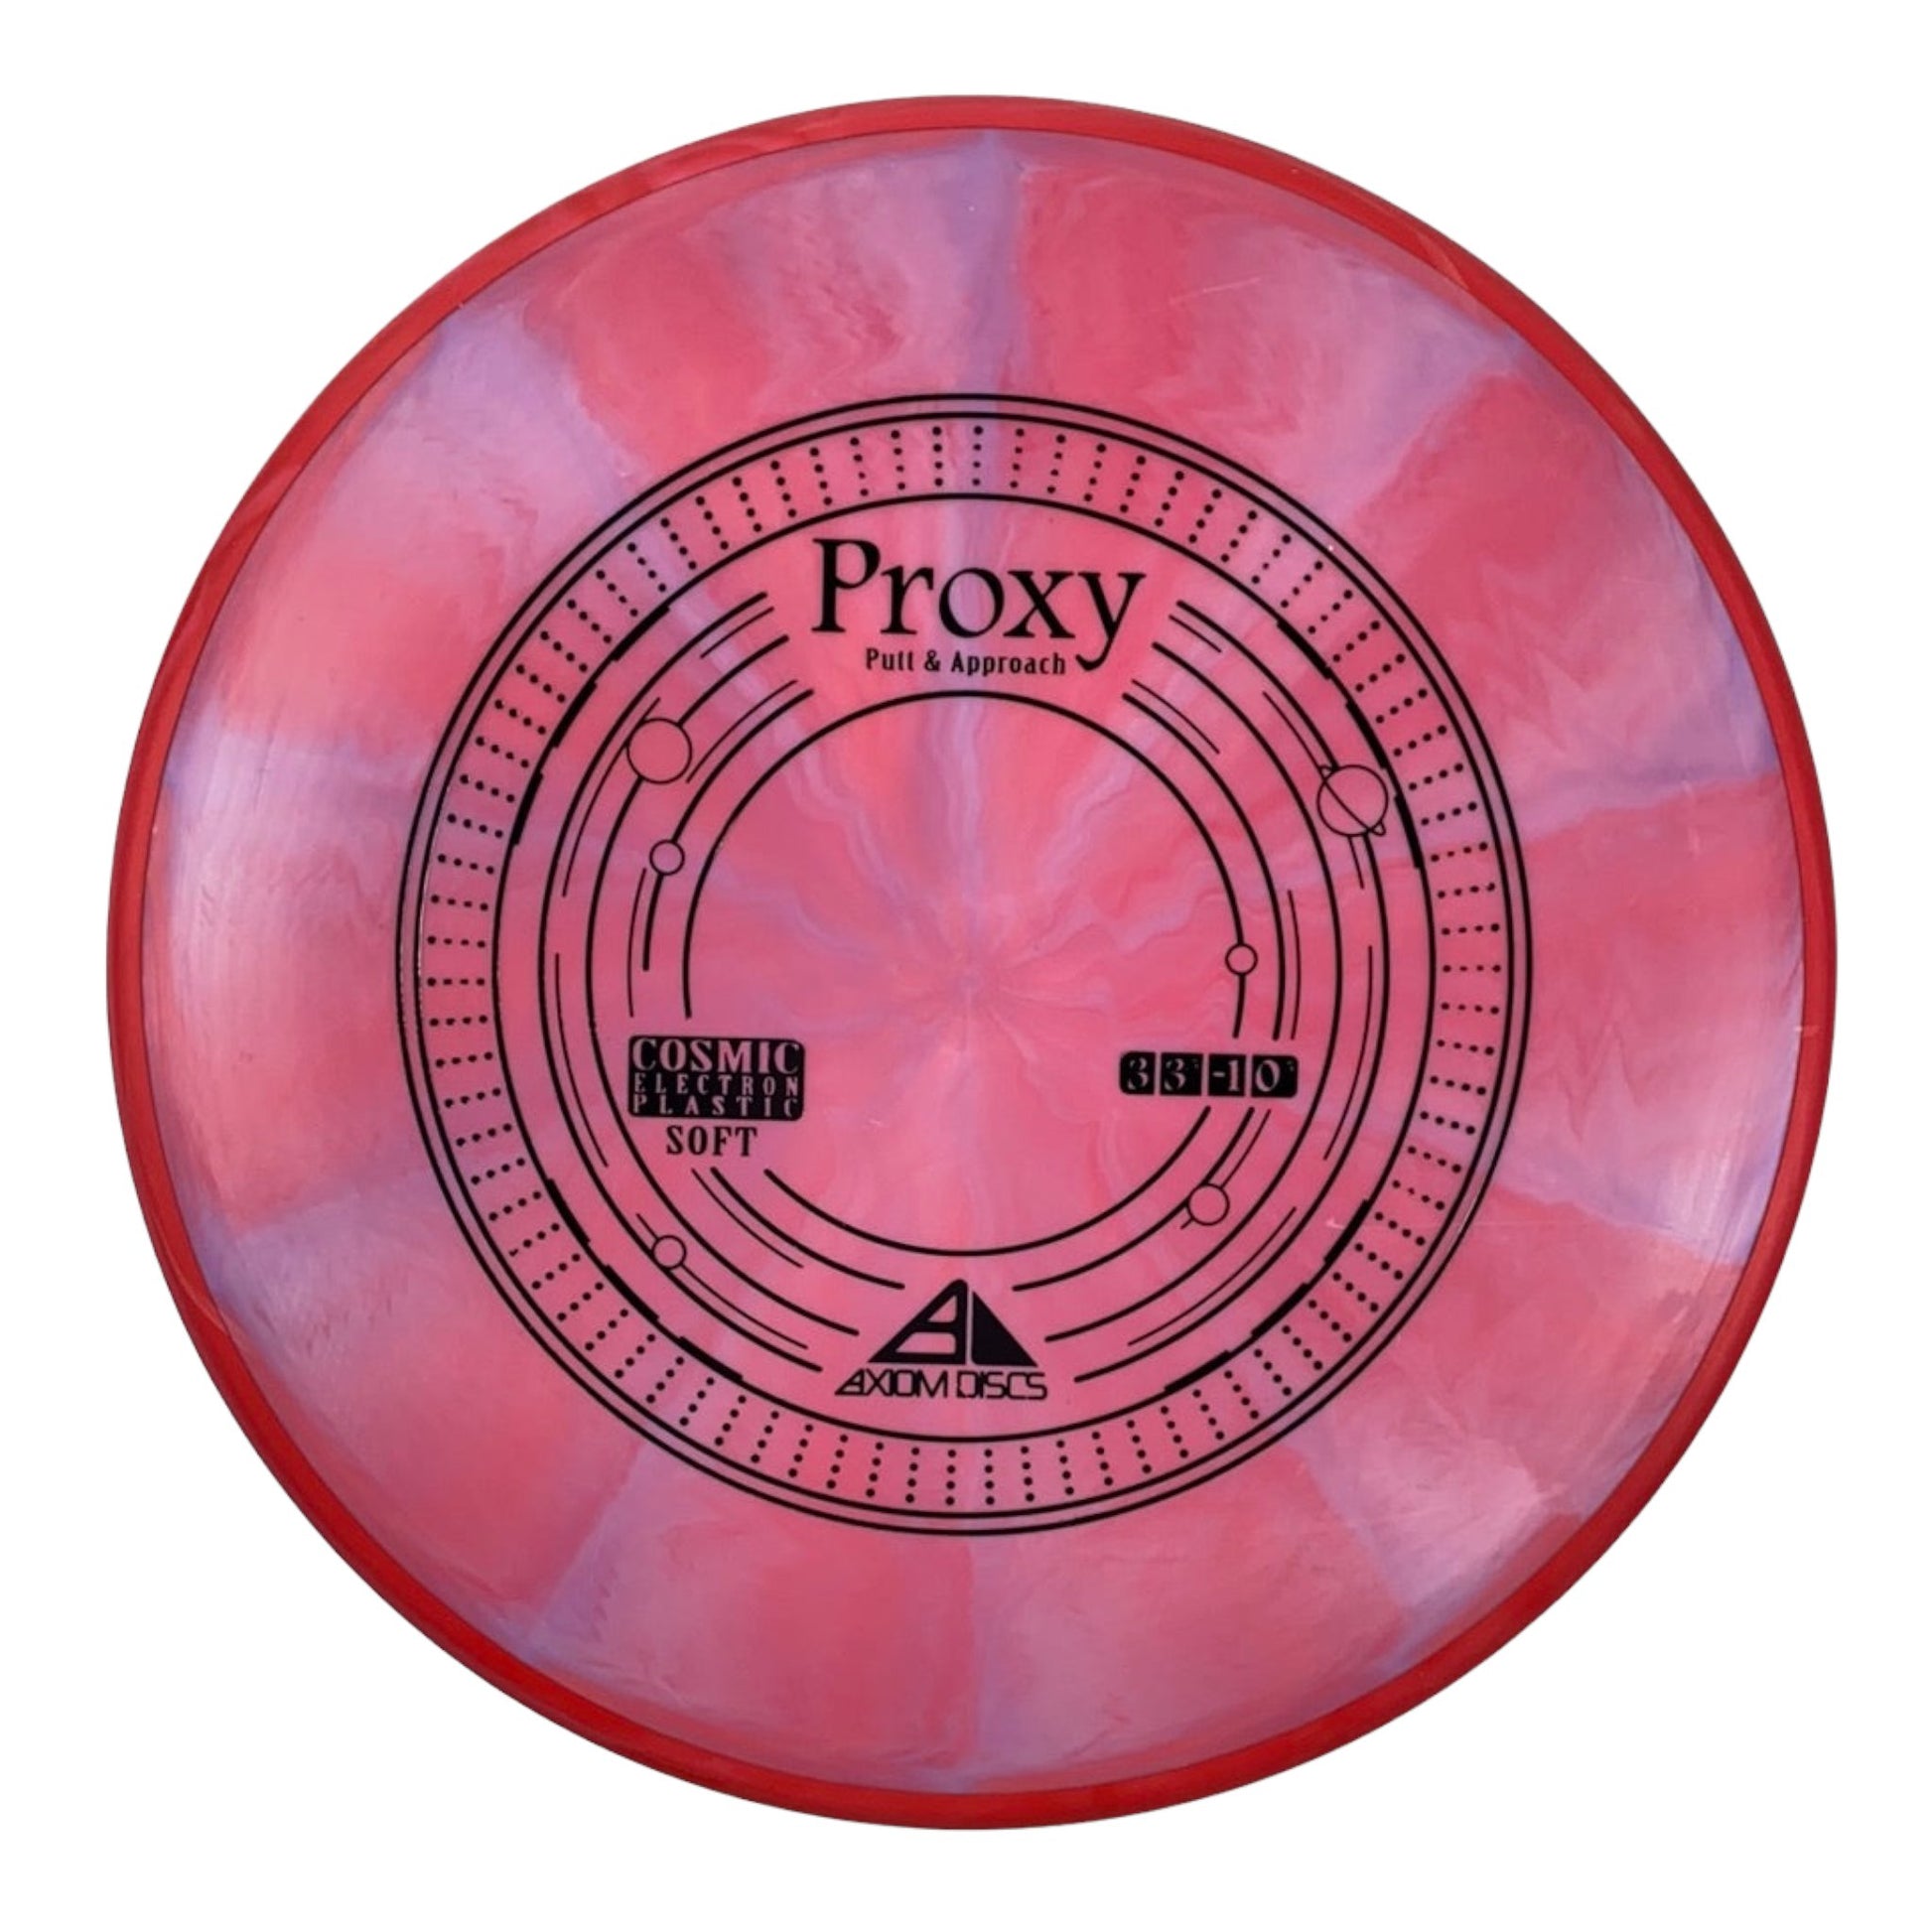 Axiom Discs Proxy | Cosmic Electron Soft | Red/Red 172g Disc Golf